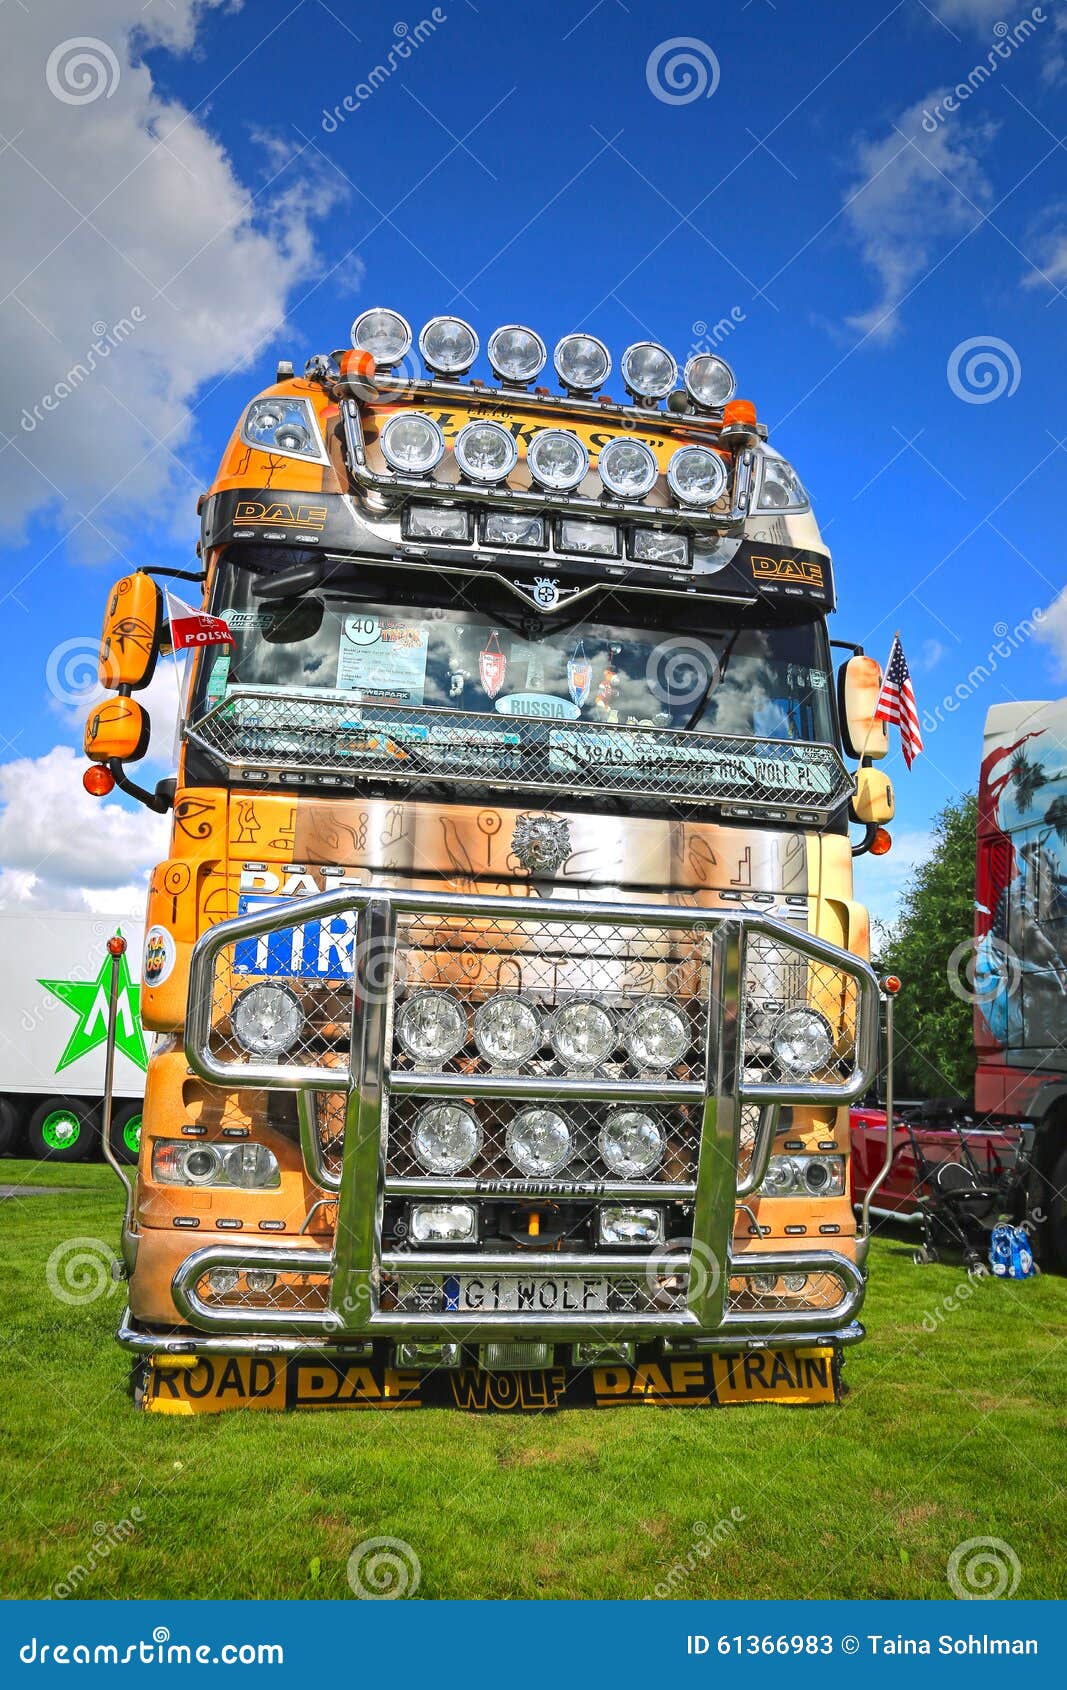 DAF 105.510 Truck Bodybuilding Light Accessories Editorial Stock Photo - Image of ancient, chrome: 61366983